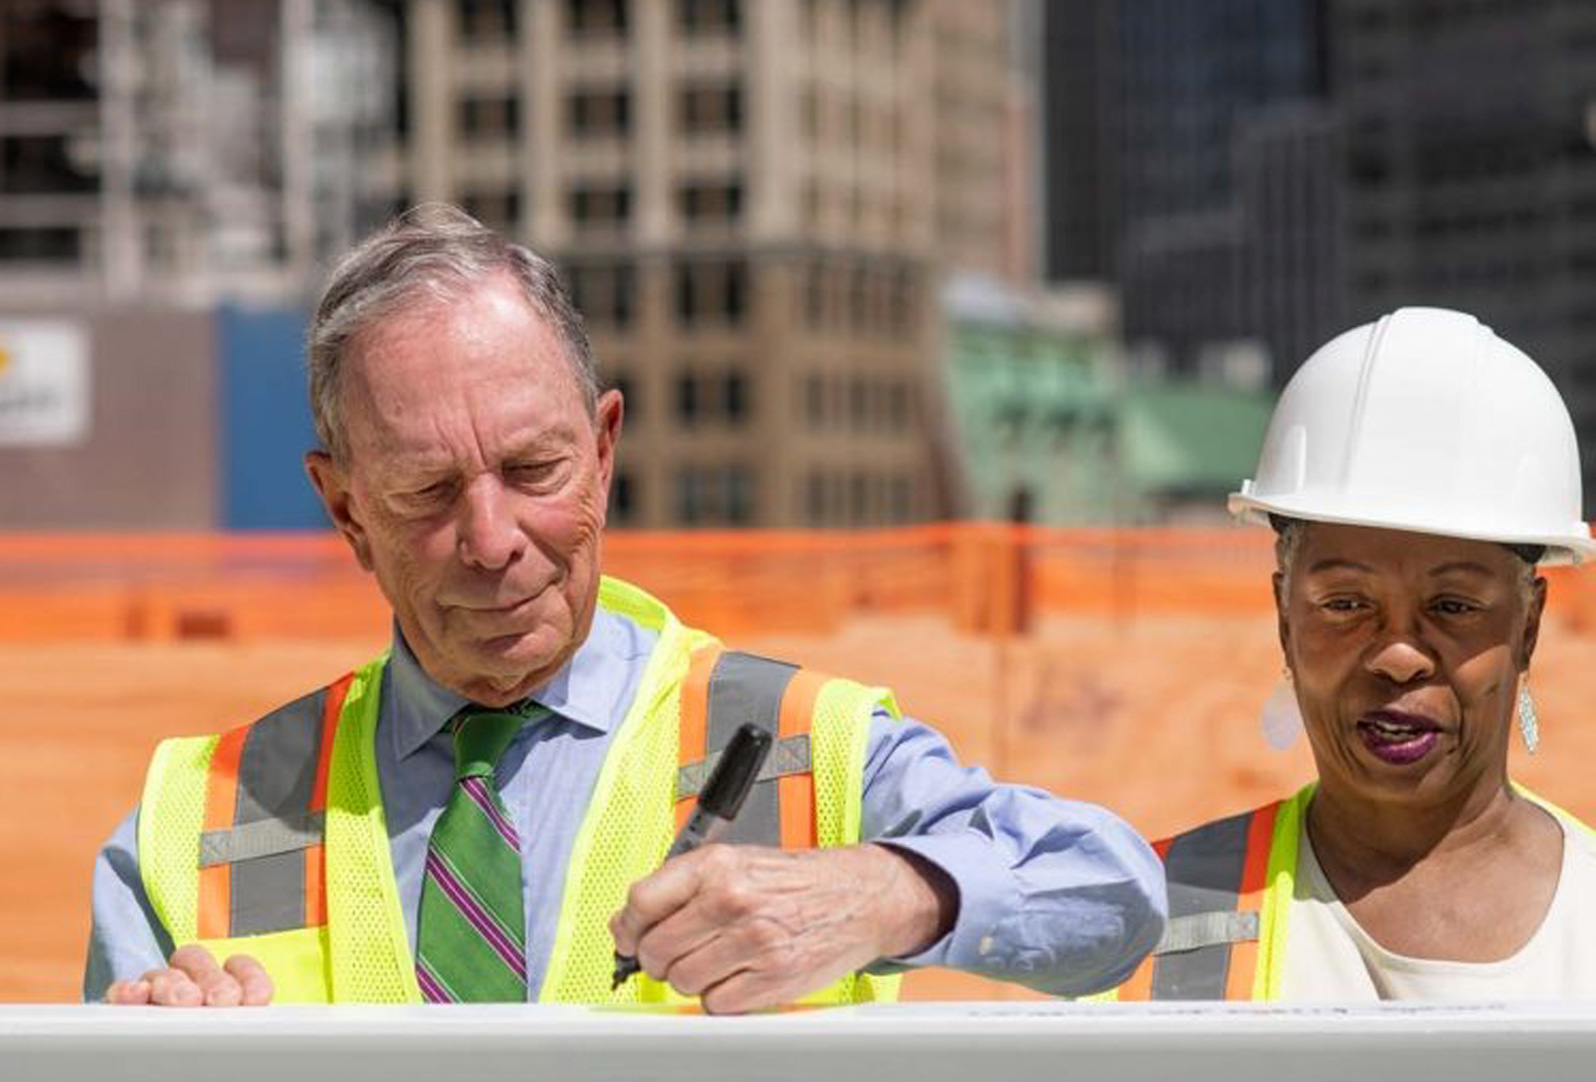 In June 2021, Mike Bloomberg joined Art Advisor Jawole Willa Jo Zollar in signing the last beam at the structure‘s topping off ceremony.